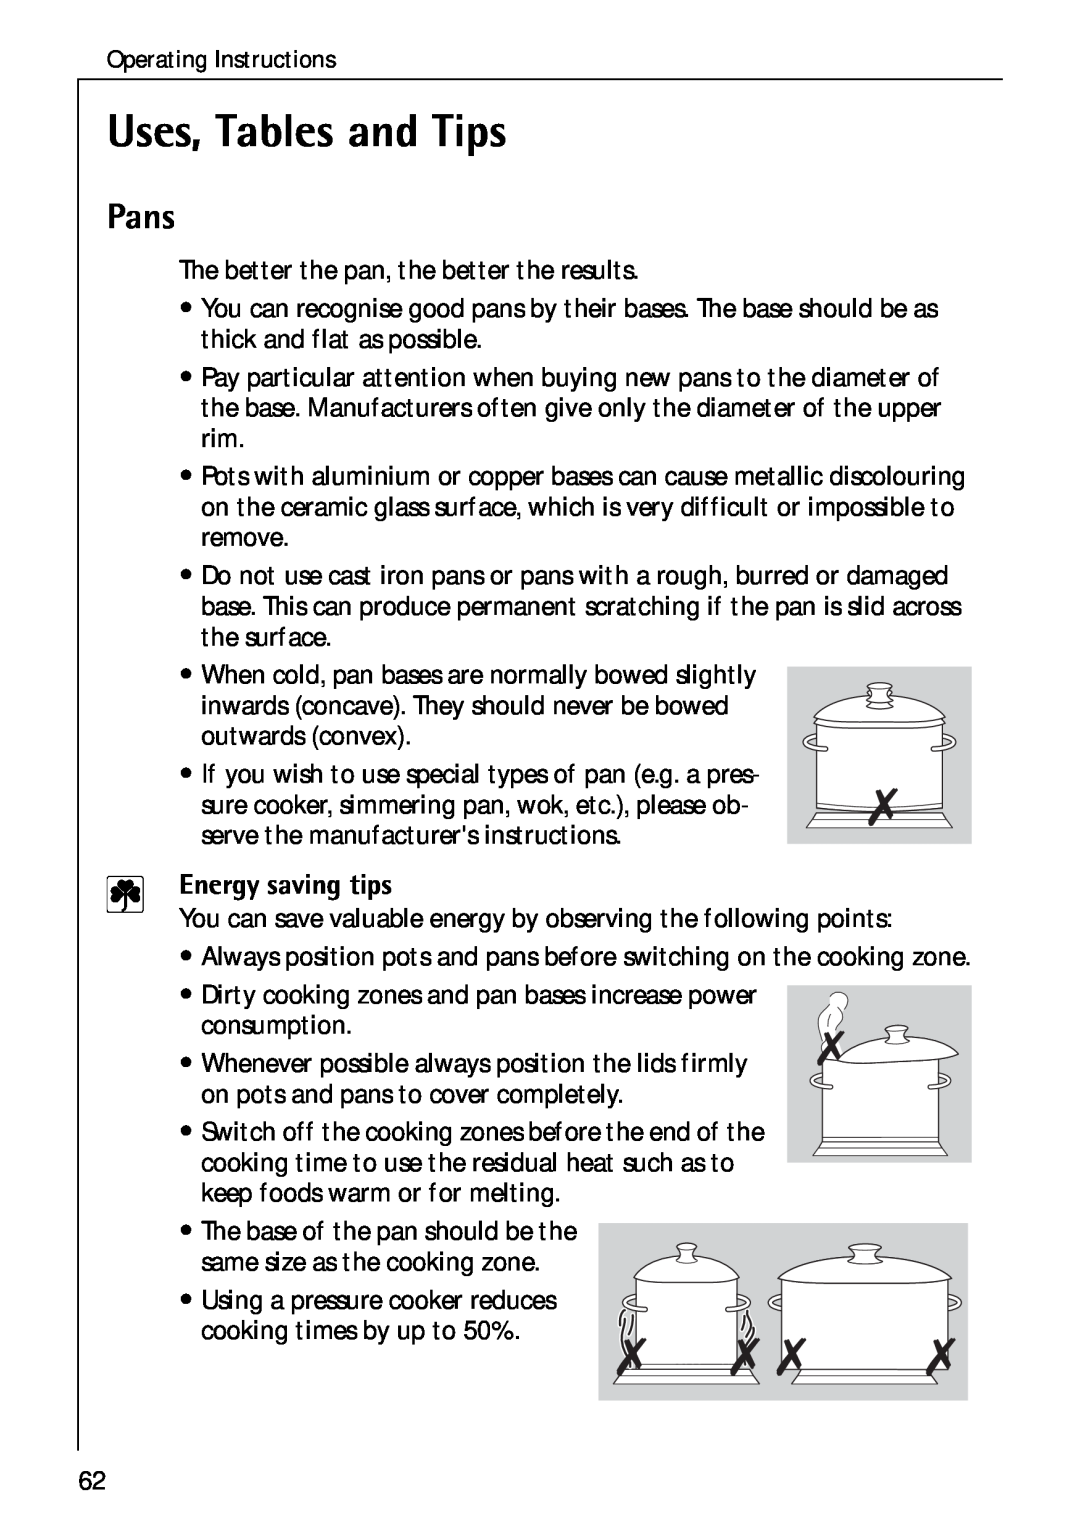 Electrolux C75301K operating instructions Uses, Tables and Tips, Pans, Energy saving tips 